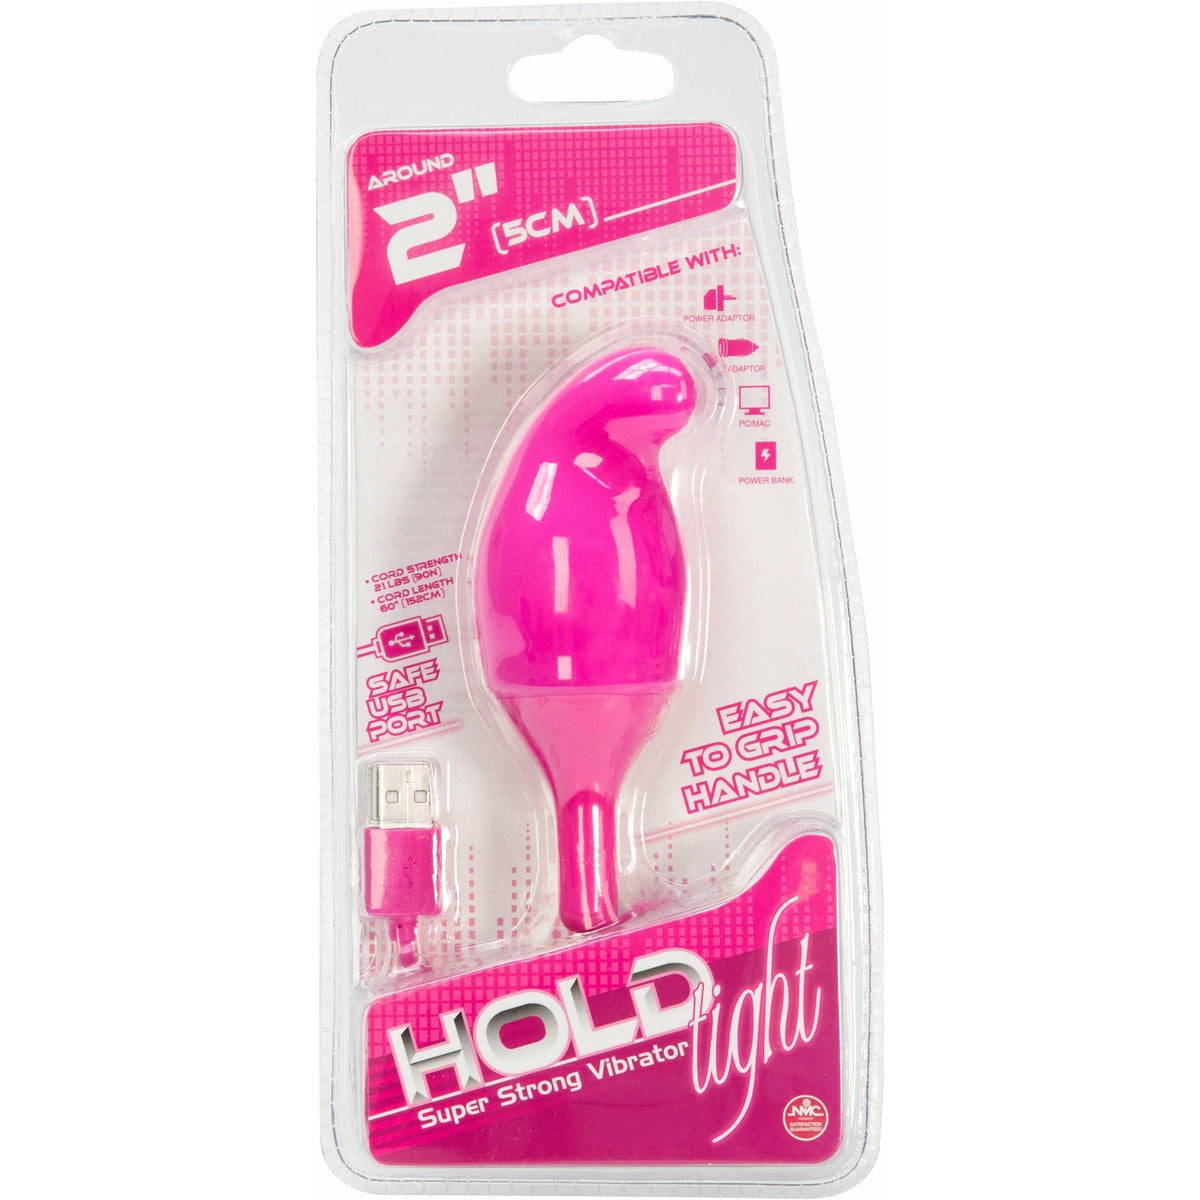 NMC Hold Tight - G-Spot Vibrator - Rechargeable - Pink